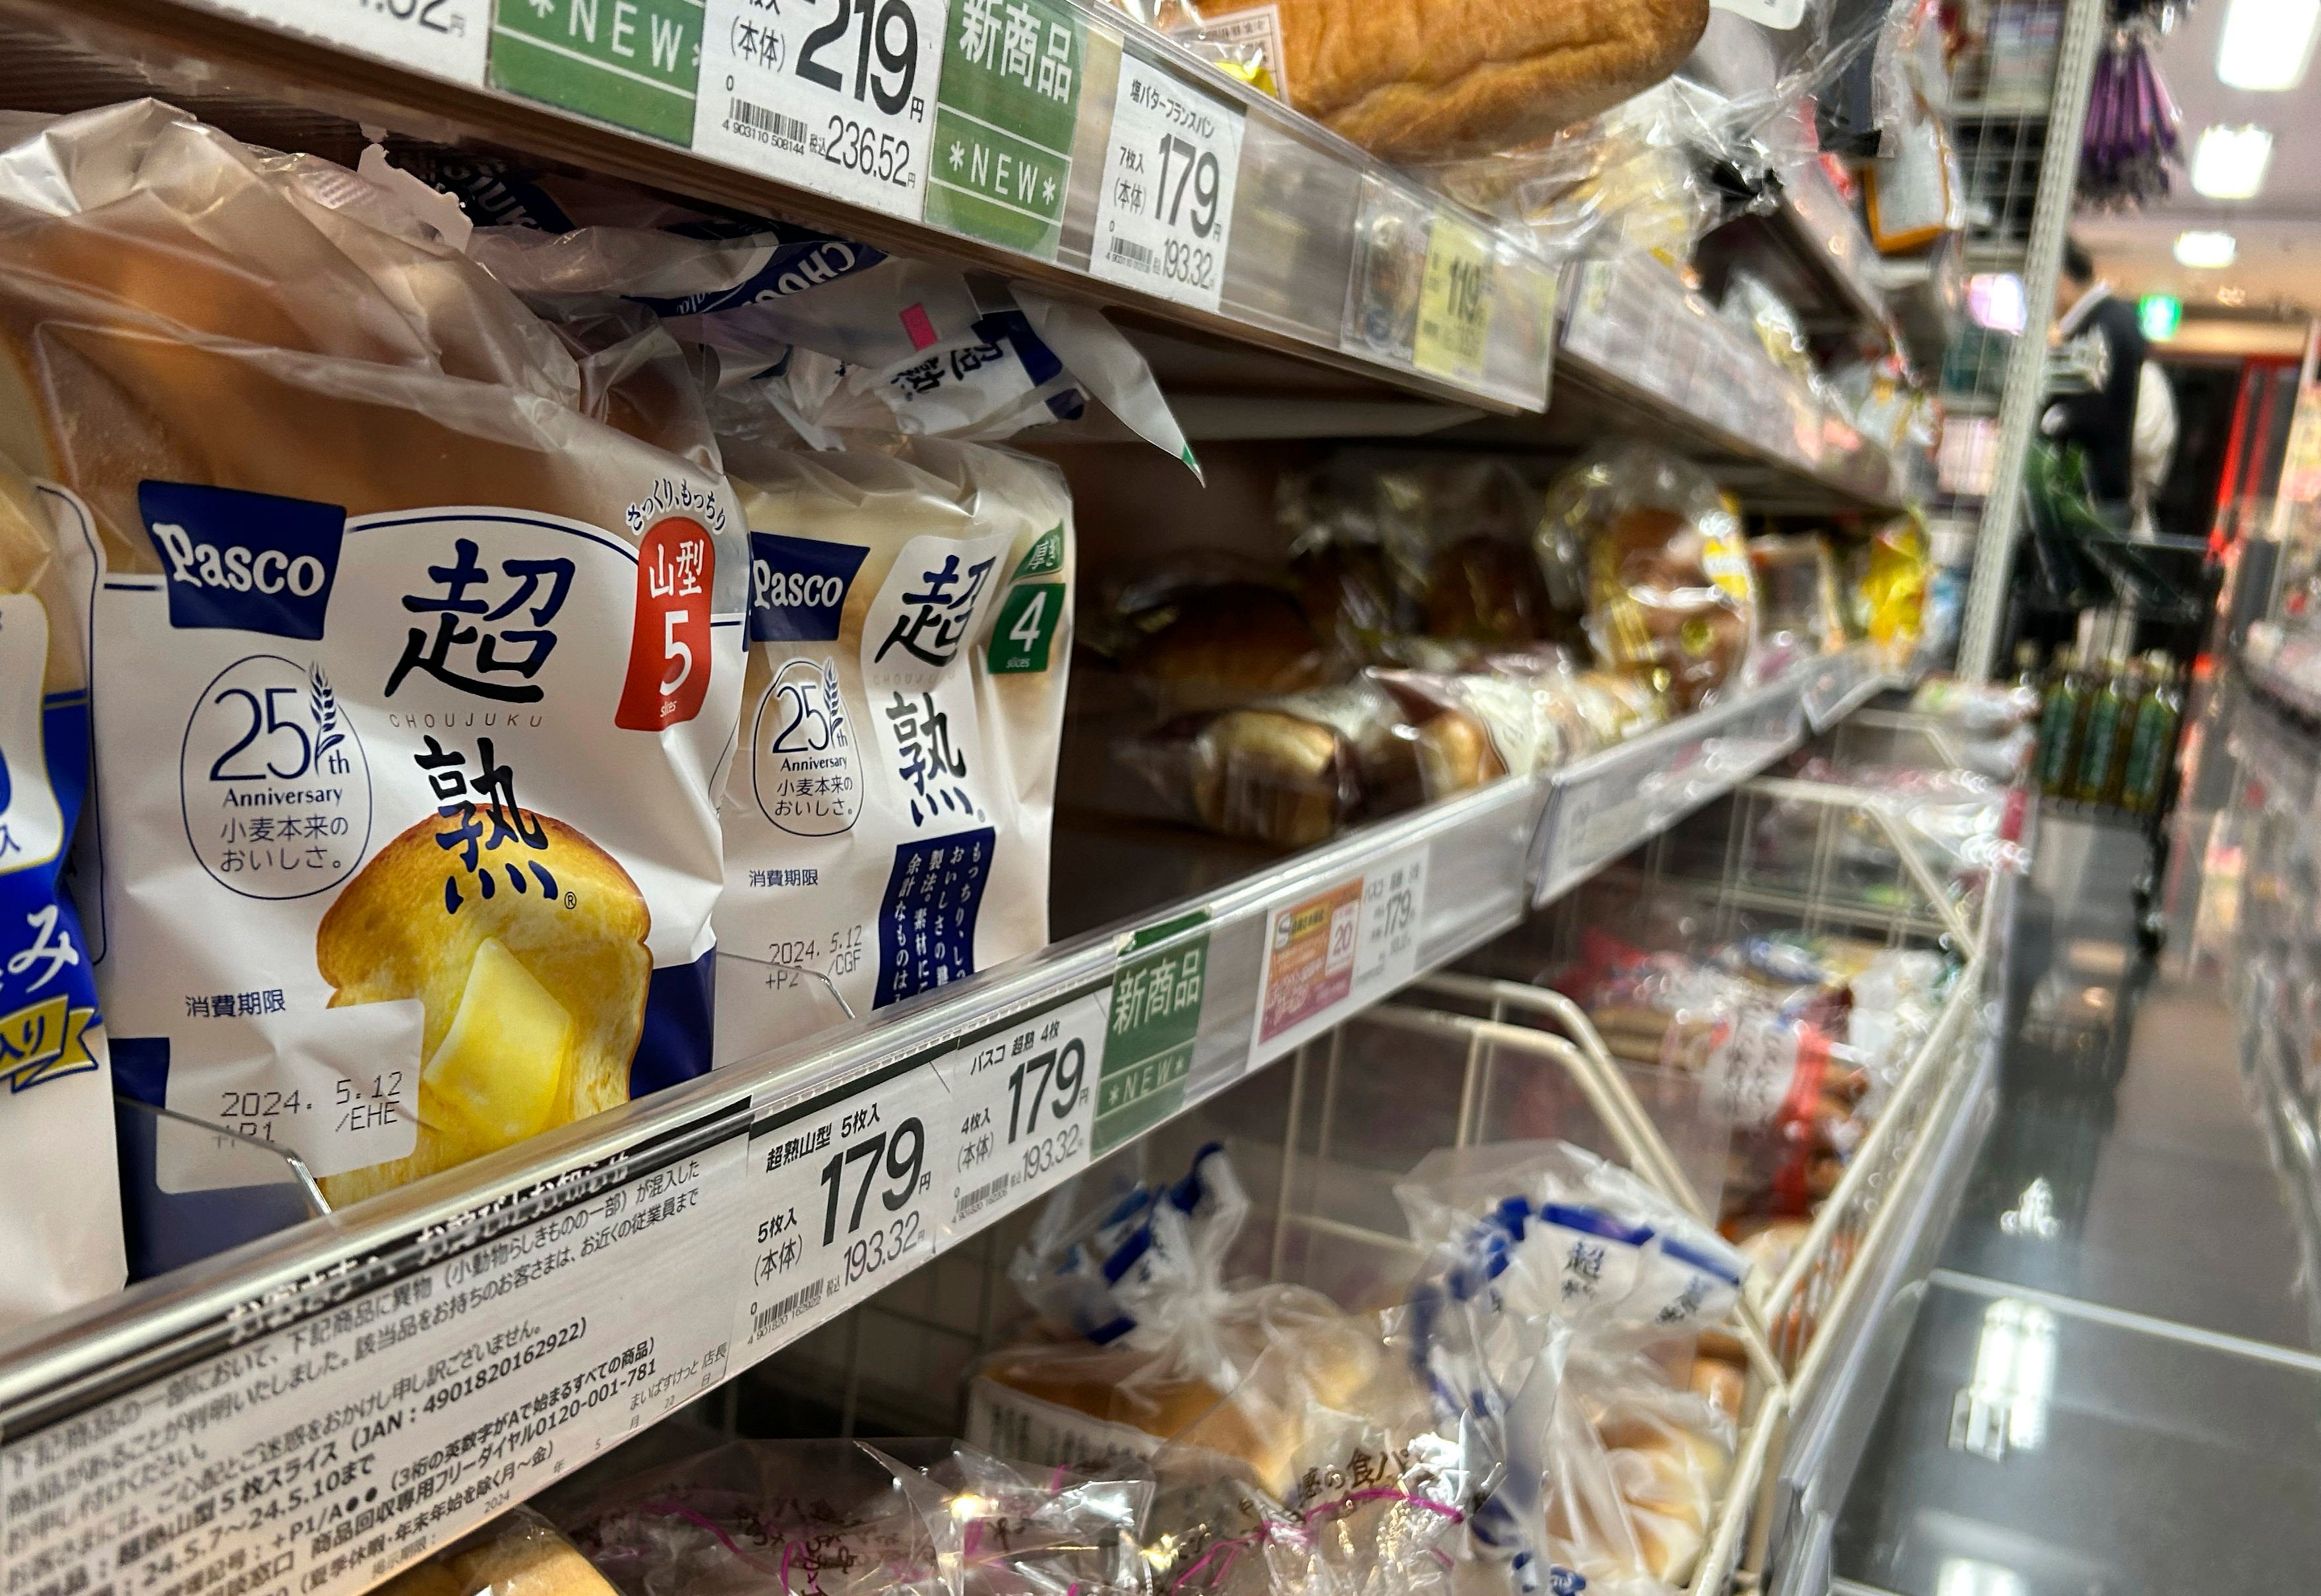 Bread products by Pasco Shikishima are on display at a supermarket in Tokyo on Thursday. Photo: AP